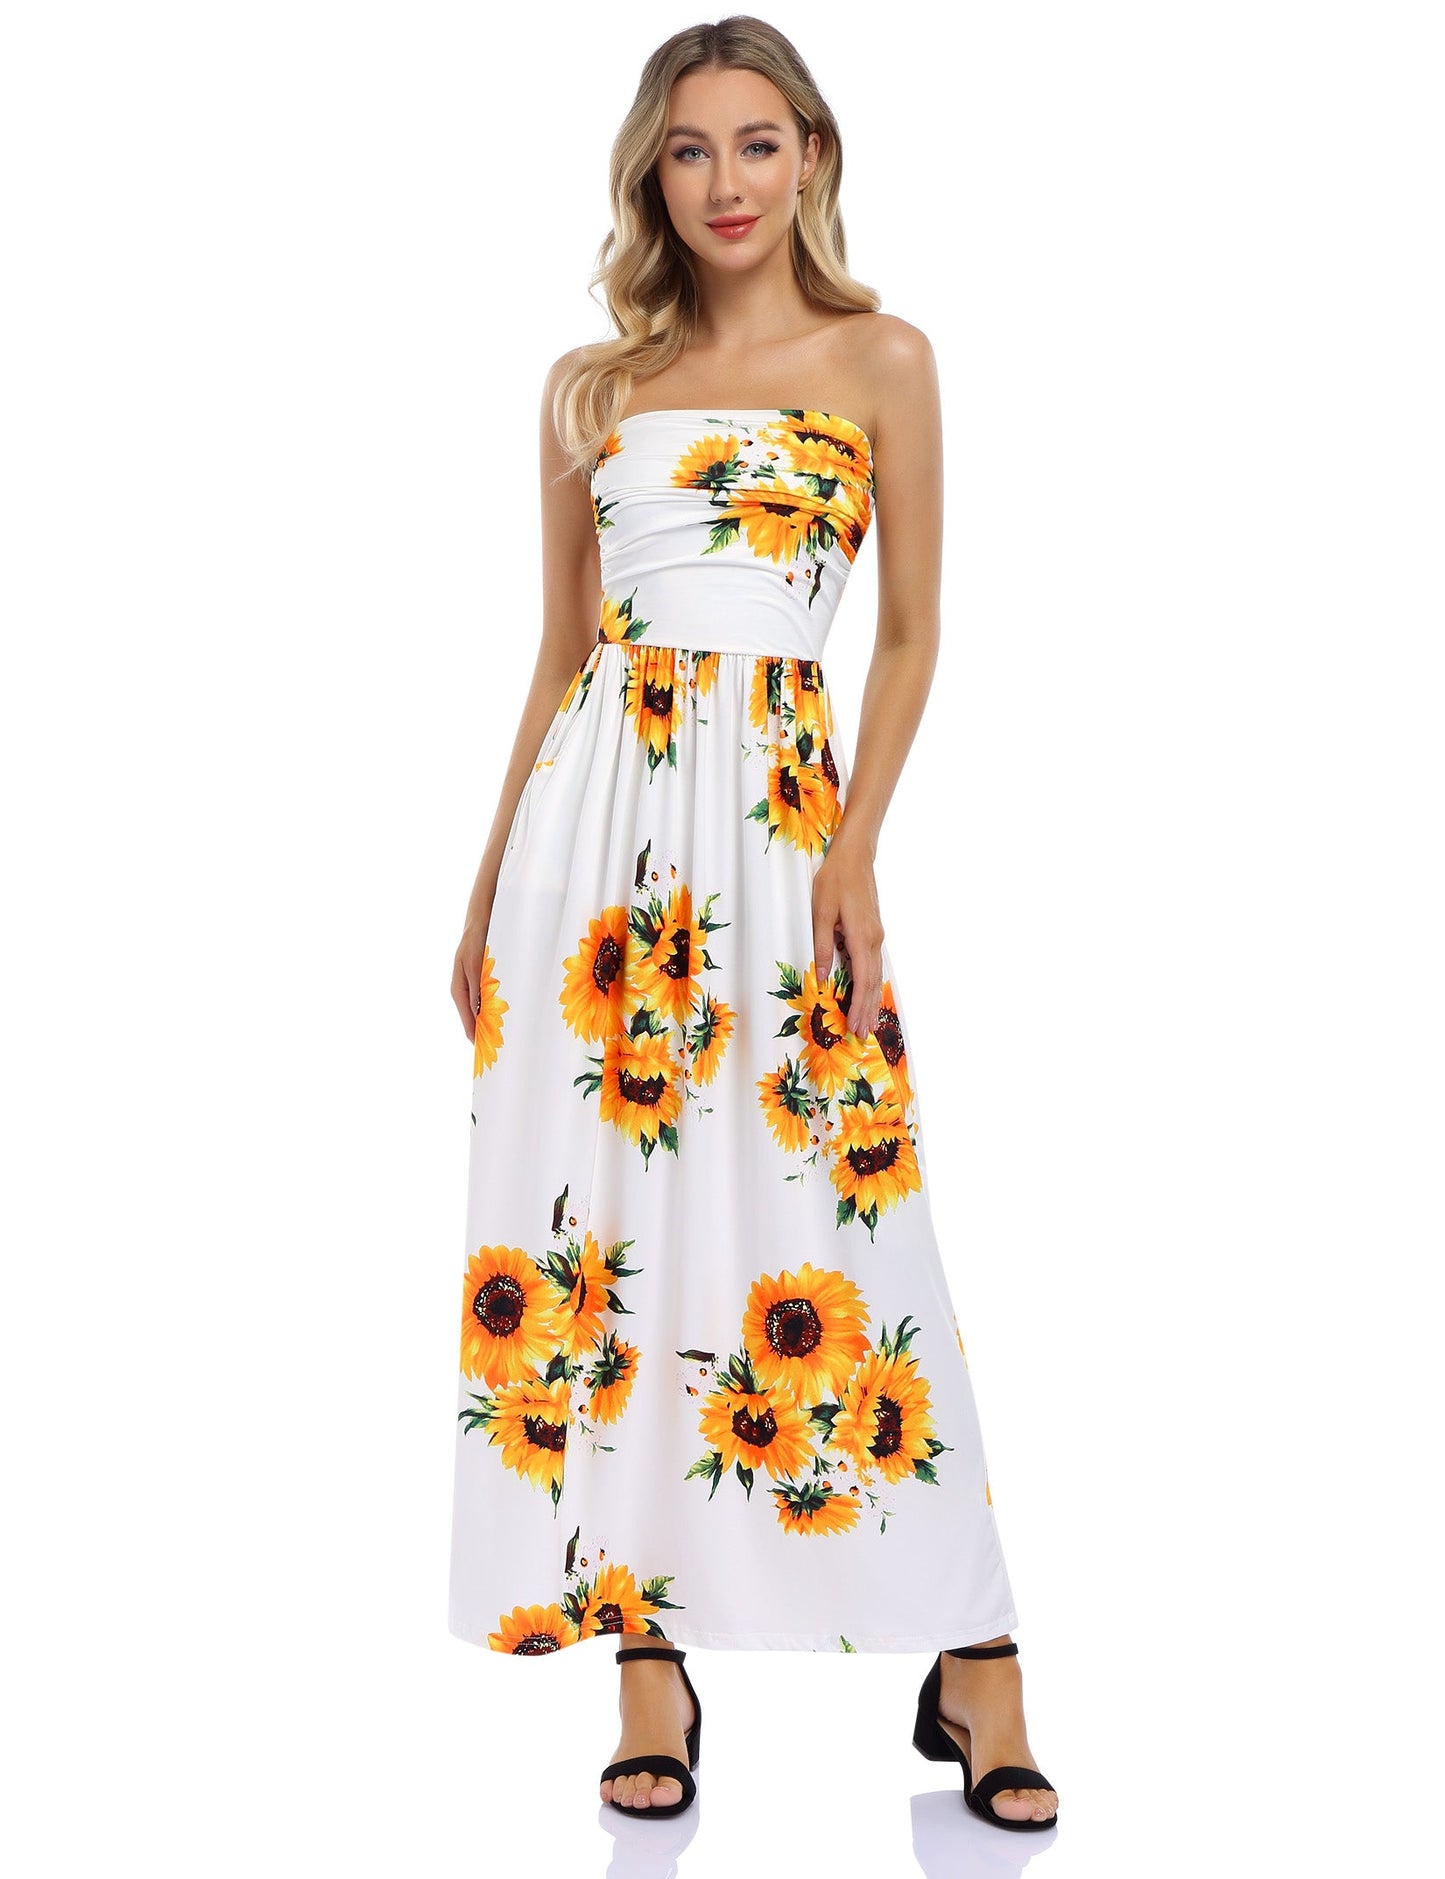 YESFASHION Women's Strapless Graceful Floral Party Maxi Long Dress Green